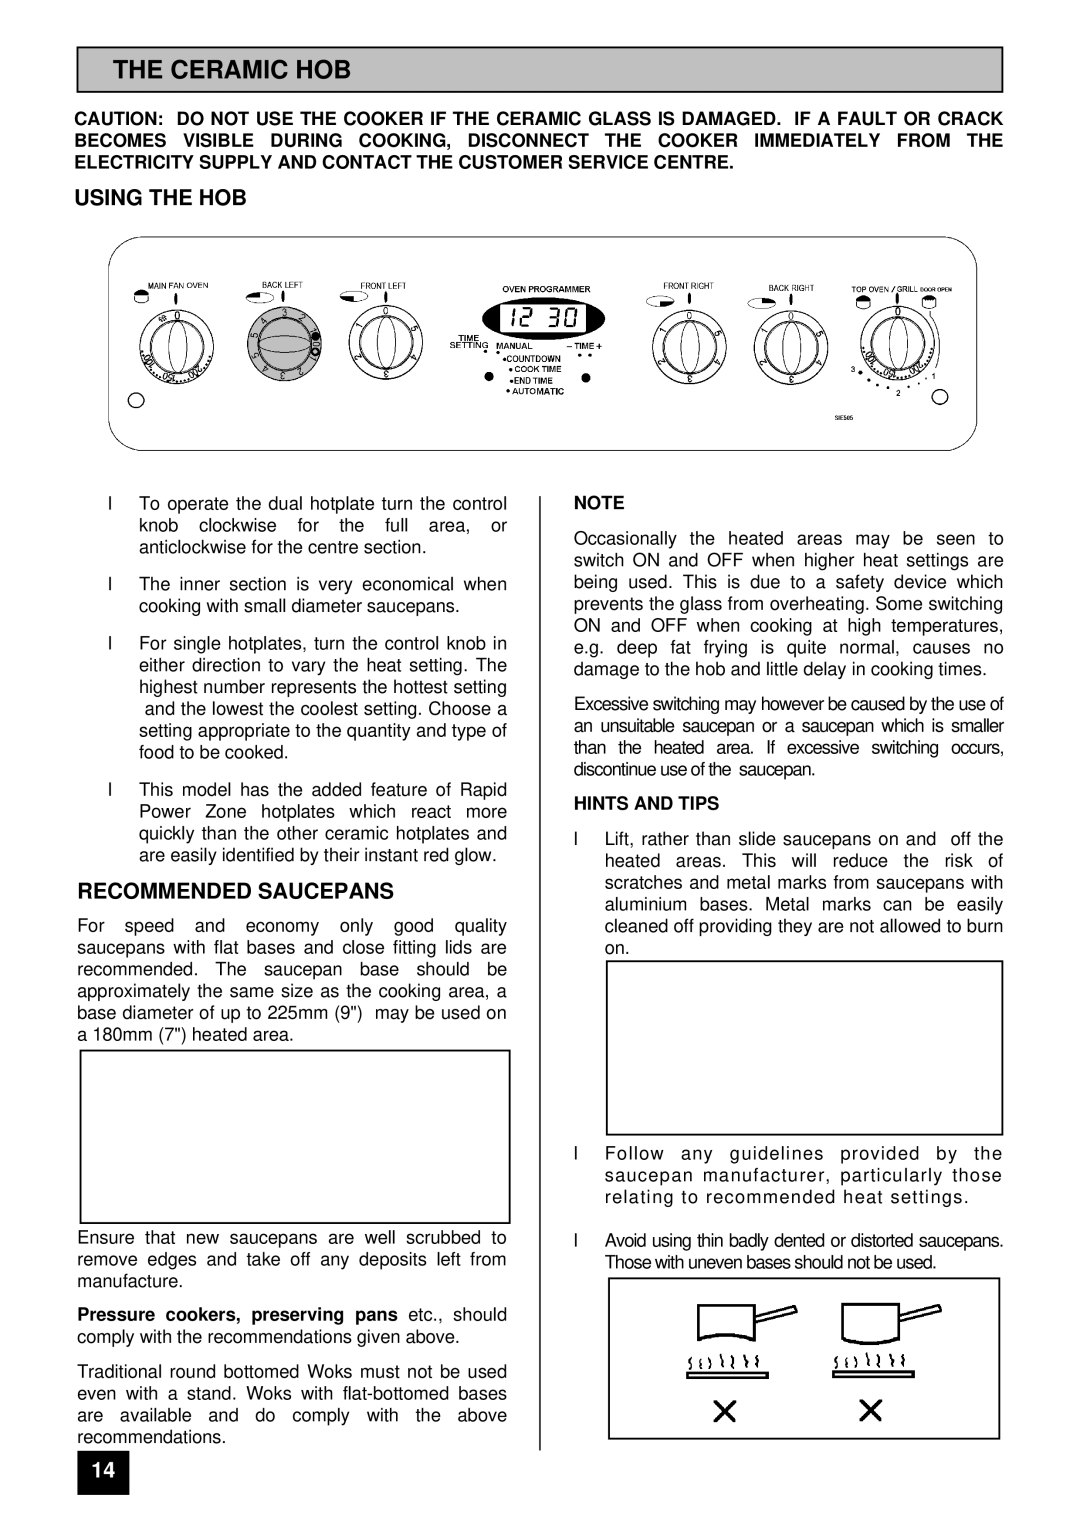 Tricity Bendix SIE 505 SSE/BZ installation instructions Ceramic HOB, Using the HOB, Recommended Saucepans 